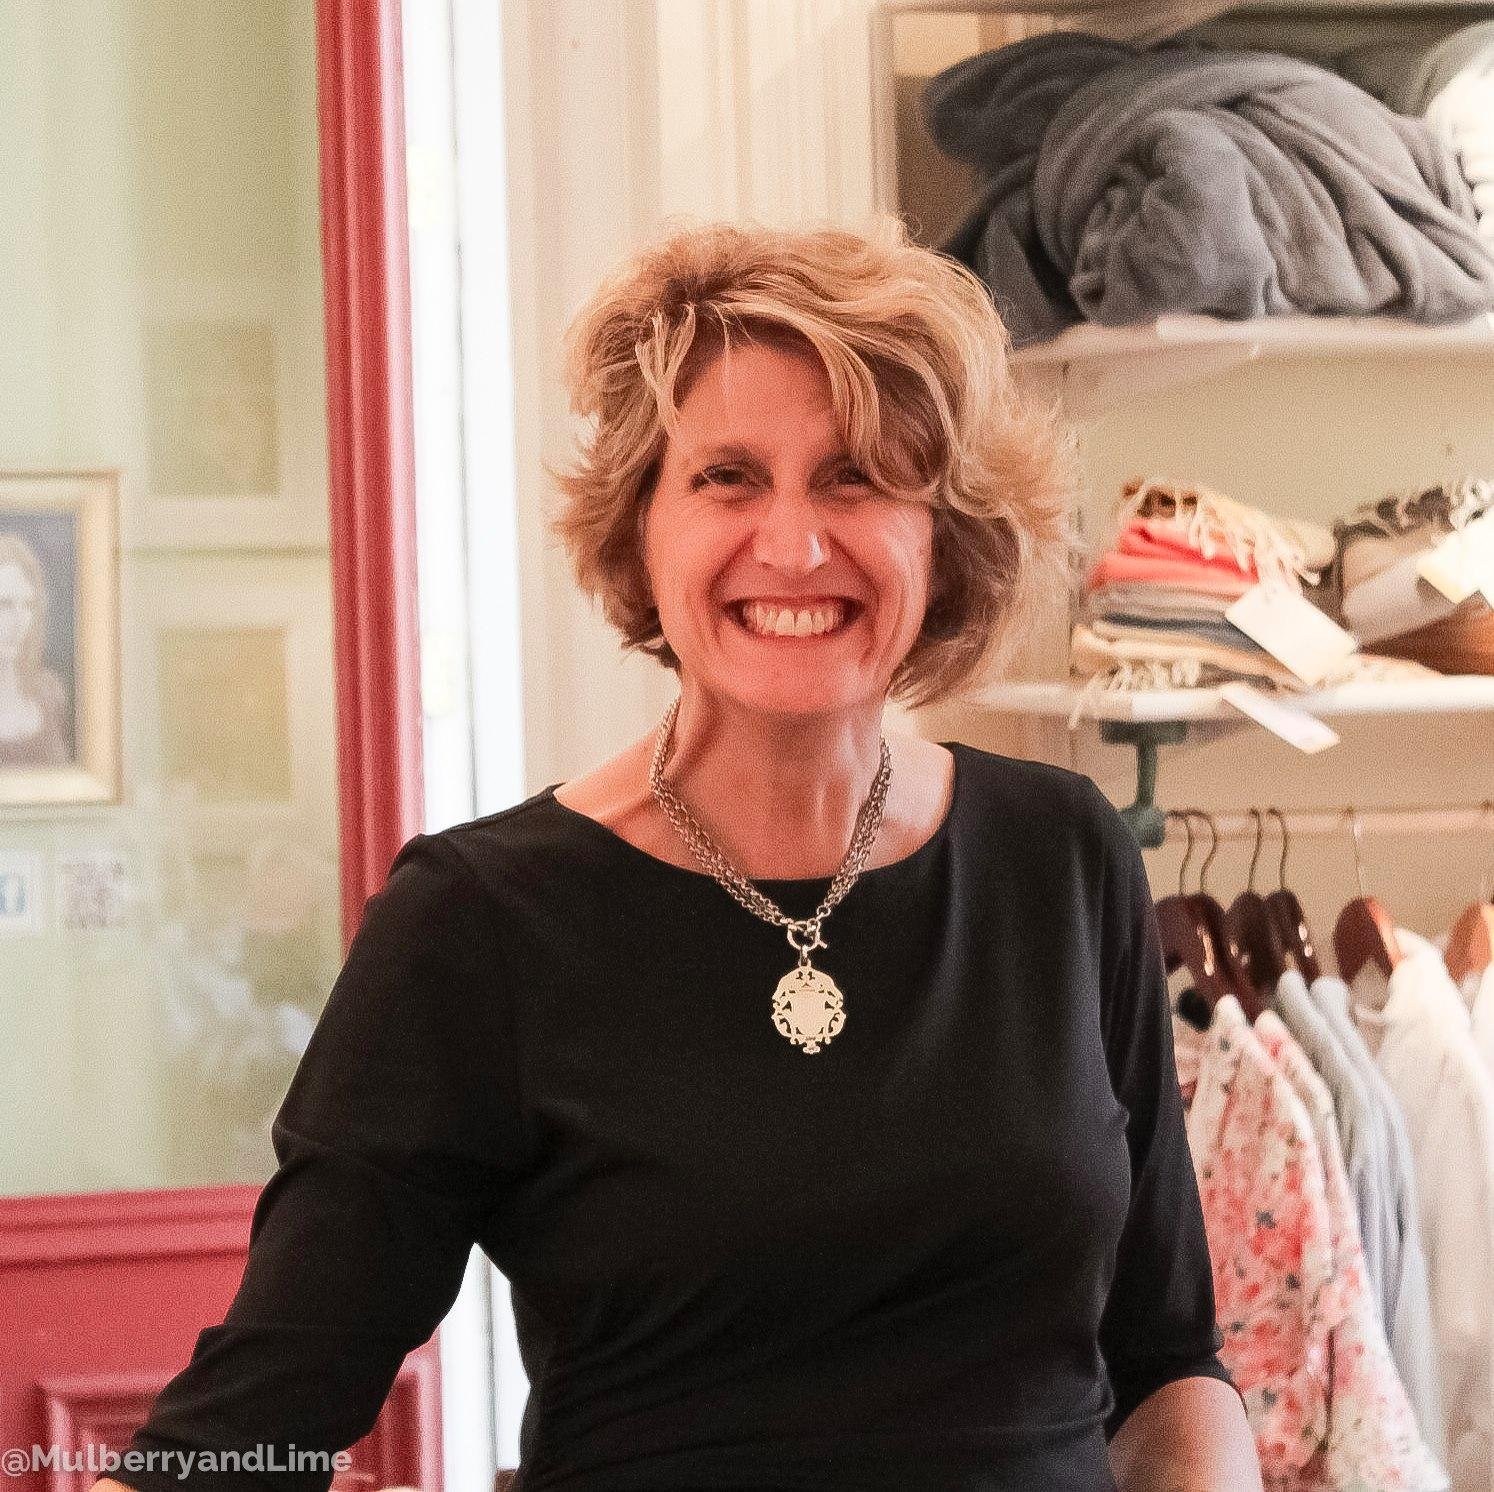 In 2001 Mary Ginocchio transformed her childhood home into a wonderful home #furnishings and #giftshop, the first of its kind #LexingtonKY #ShareTheLex